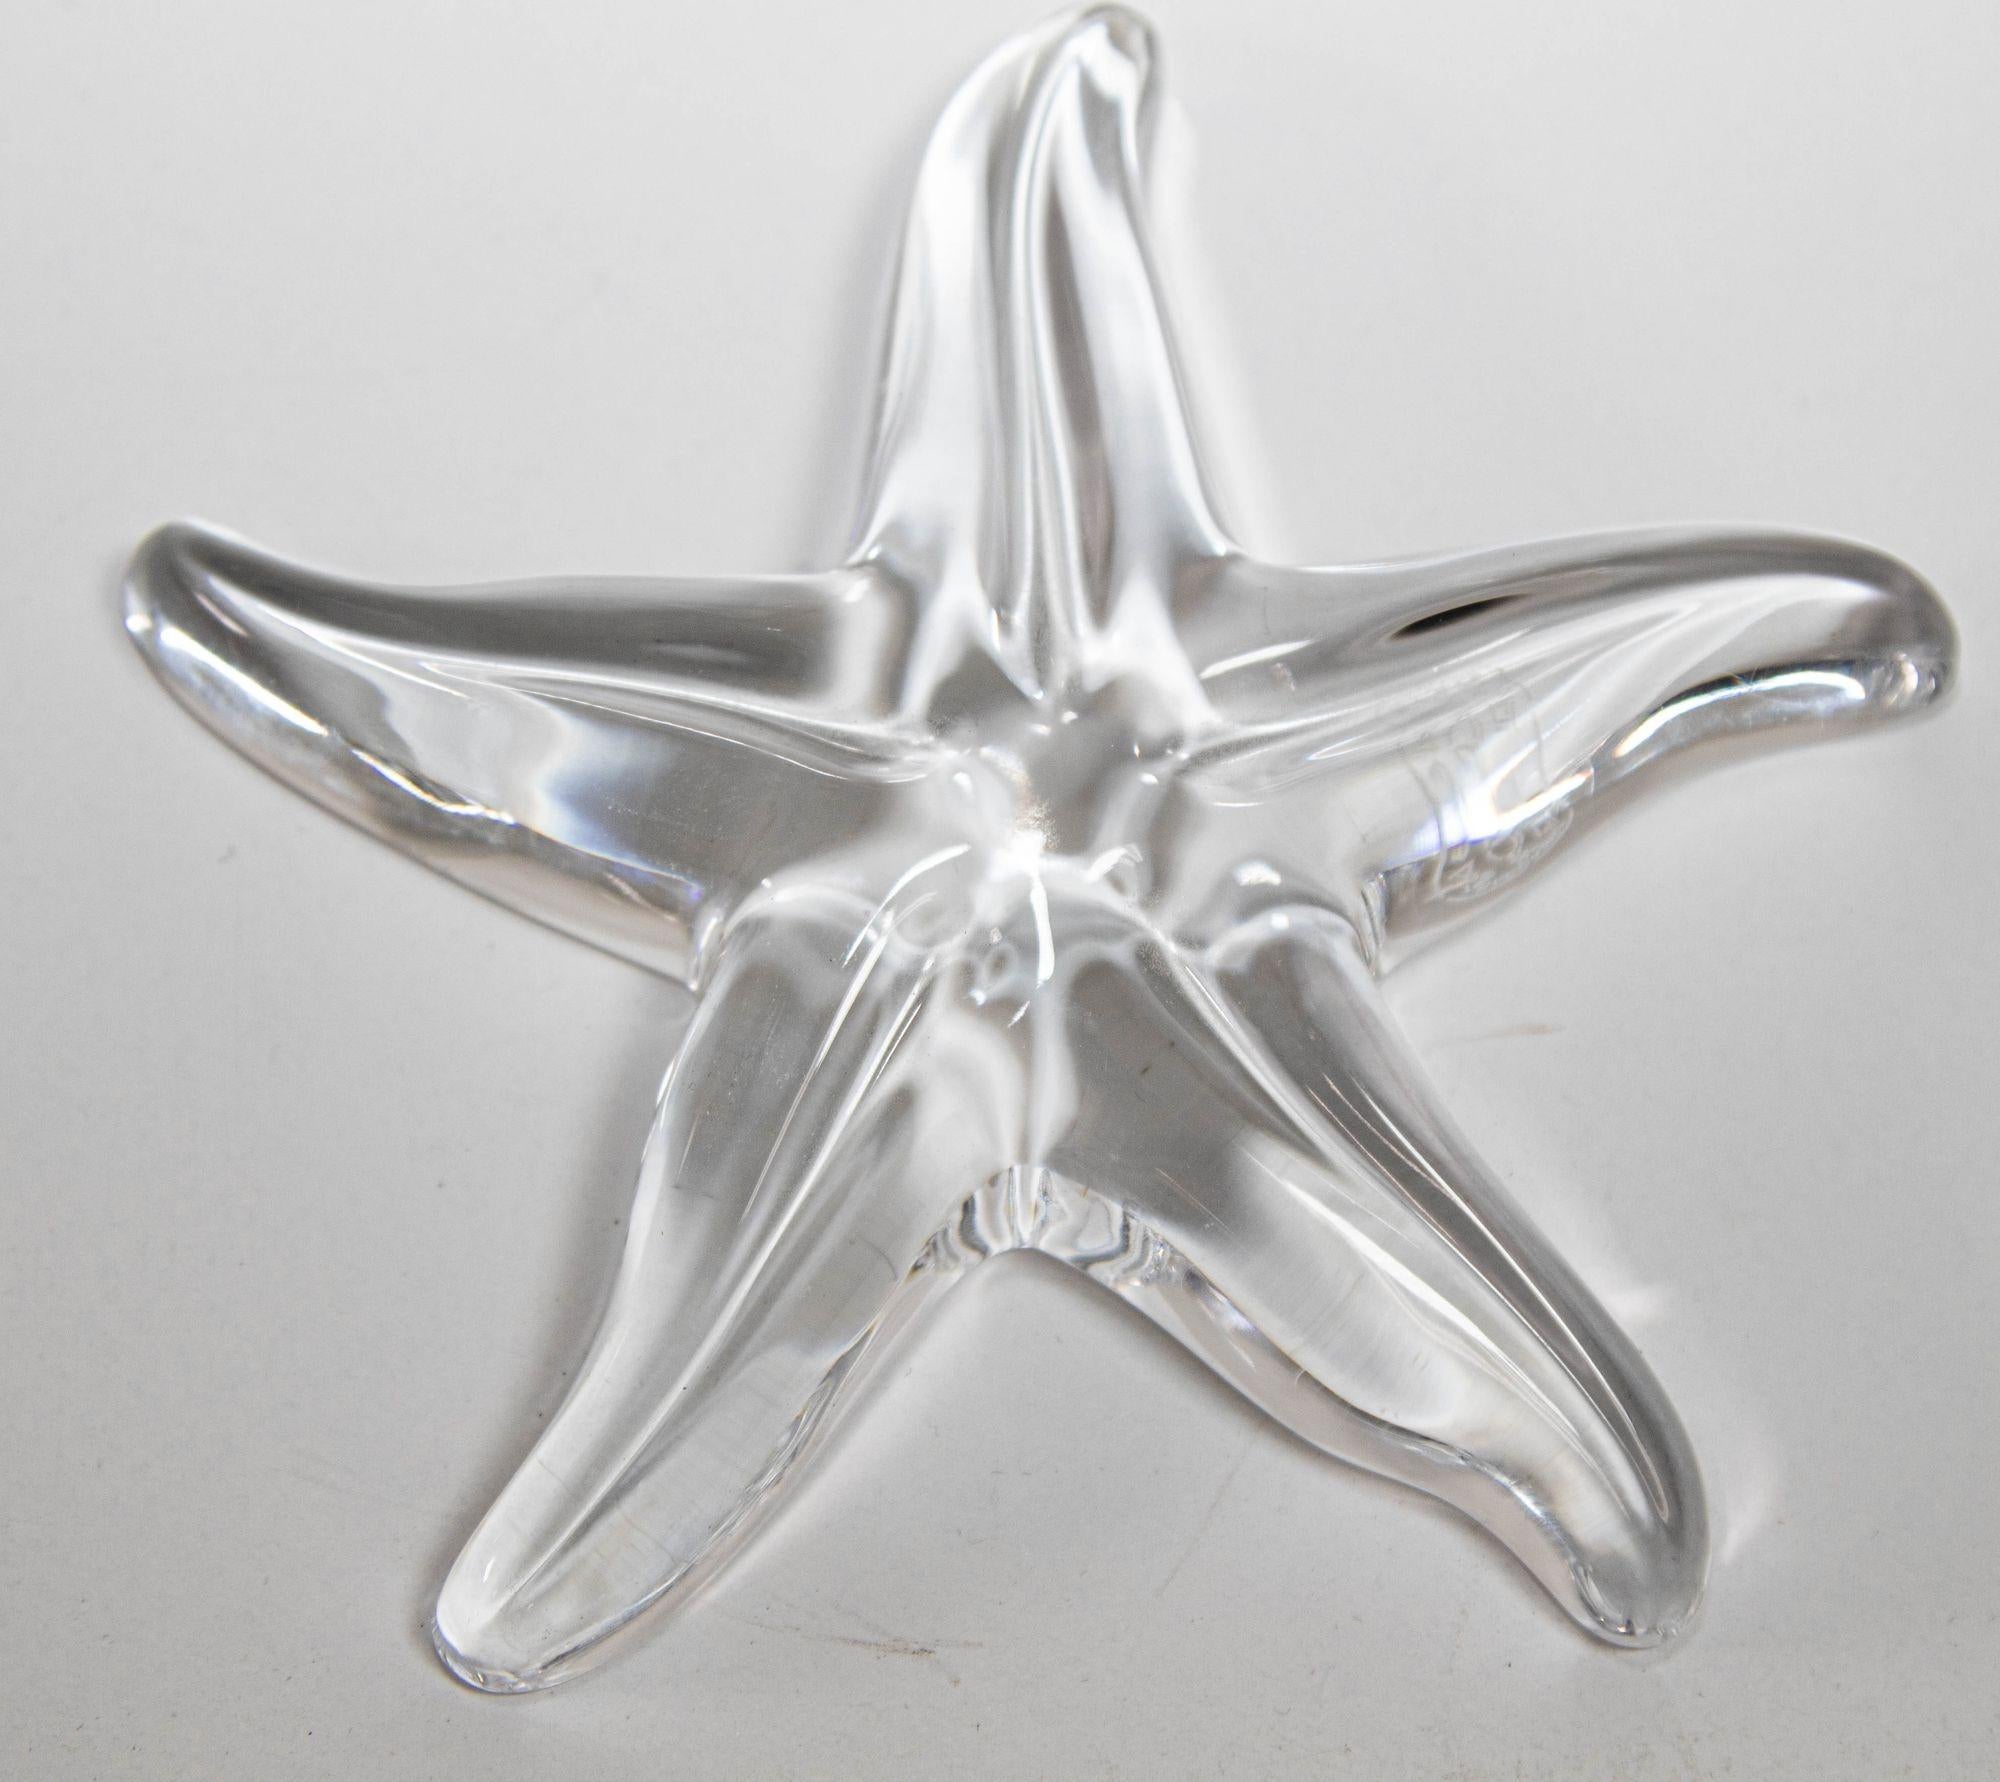 Vintage Translucent Crystal Starfish Paperweight by Baccarat France.
This elegant clear crystal art glass paperweight was realized by Maison Baccarat one of the world's finest makers of crystal products since 1765- in France.
It features five reeded